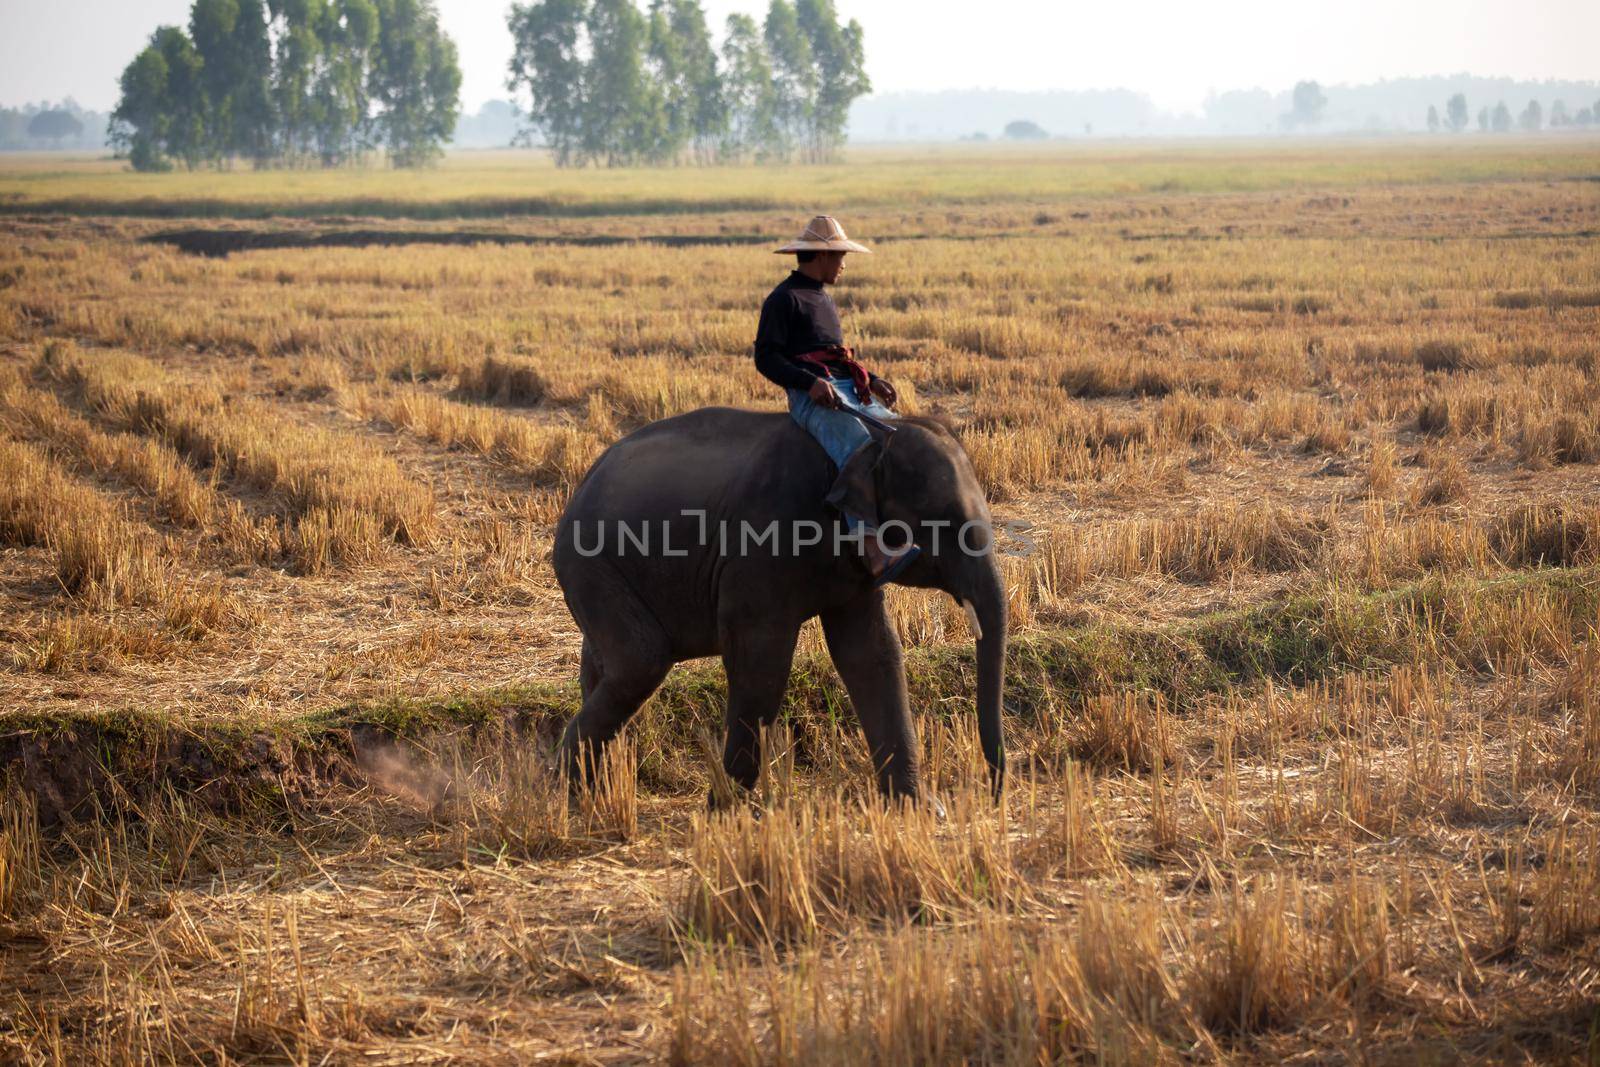 The silhouette of a person riding an elephant in a field near trees at the sunset time. Asian farmer working in the field. by chuanchai